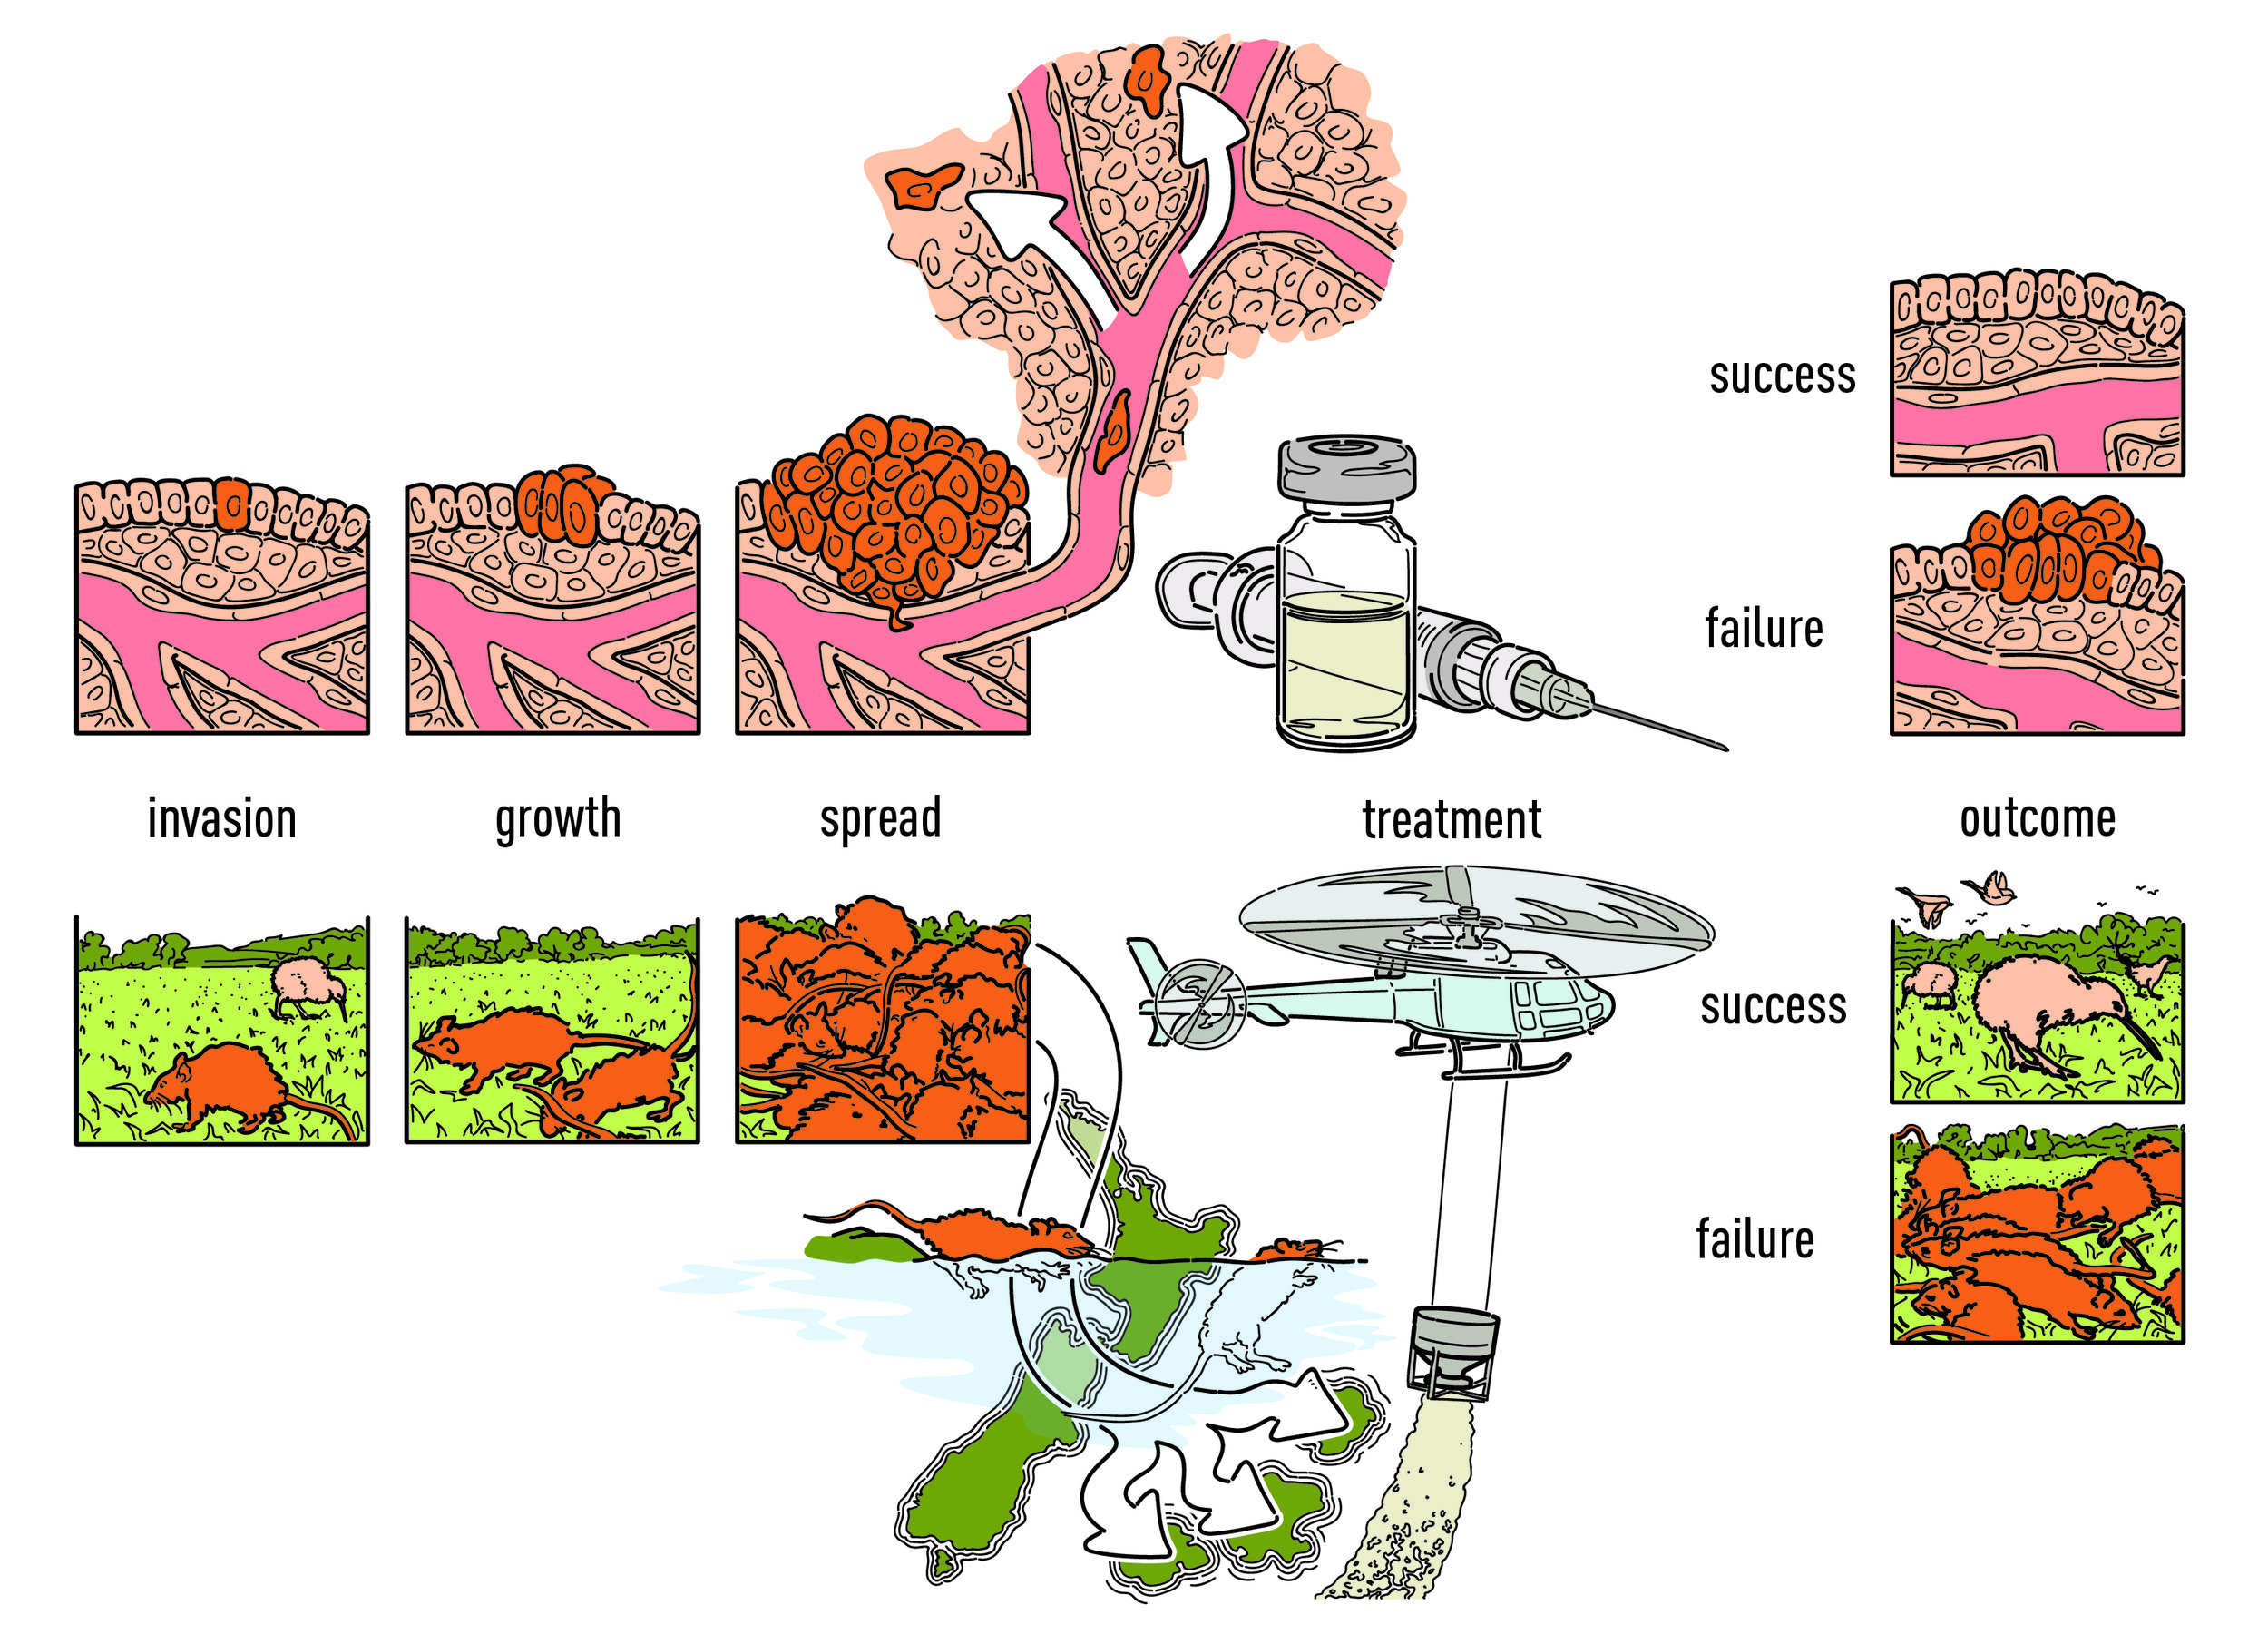 Treating Cancer as an Invasive Species, journal article abstract